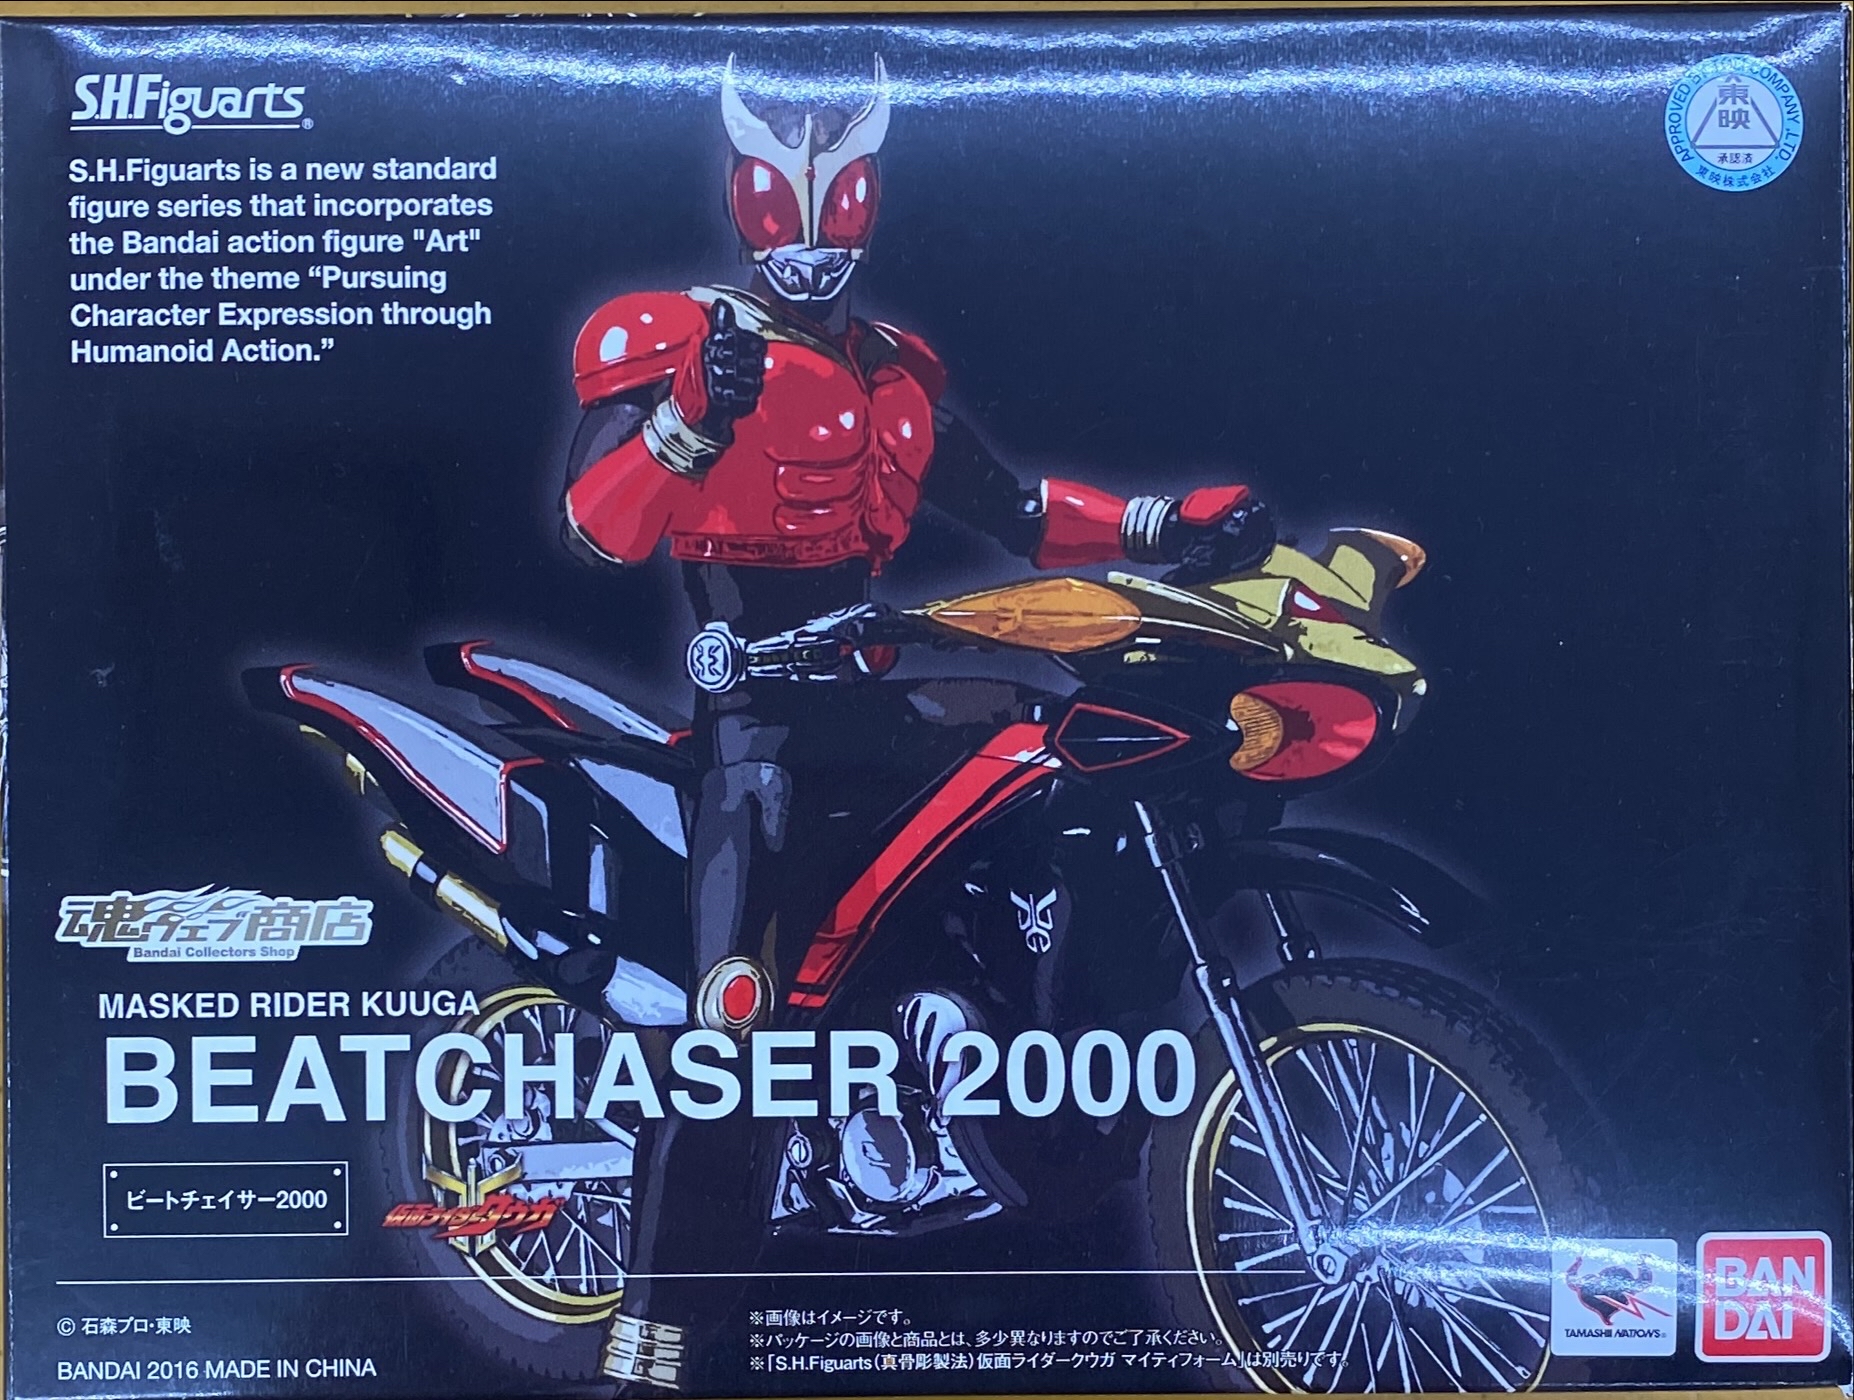 <strong>S.H.Figuarts ビートチェイサー2000 「仮面ライダークウガ」</strong>